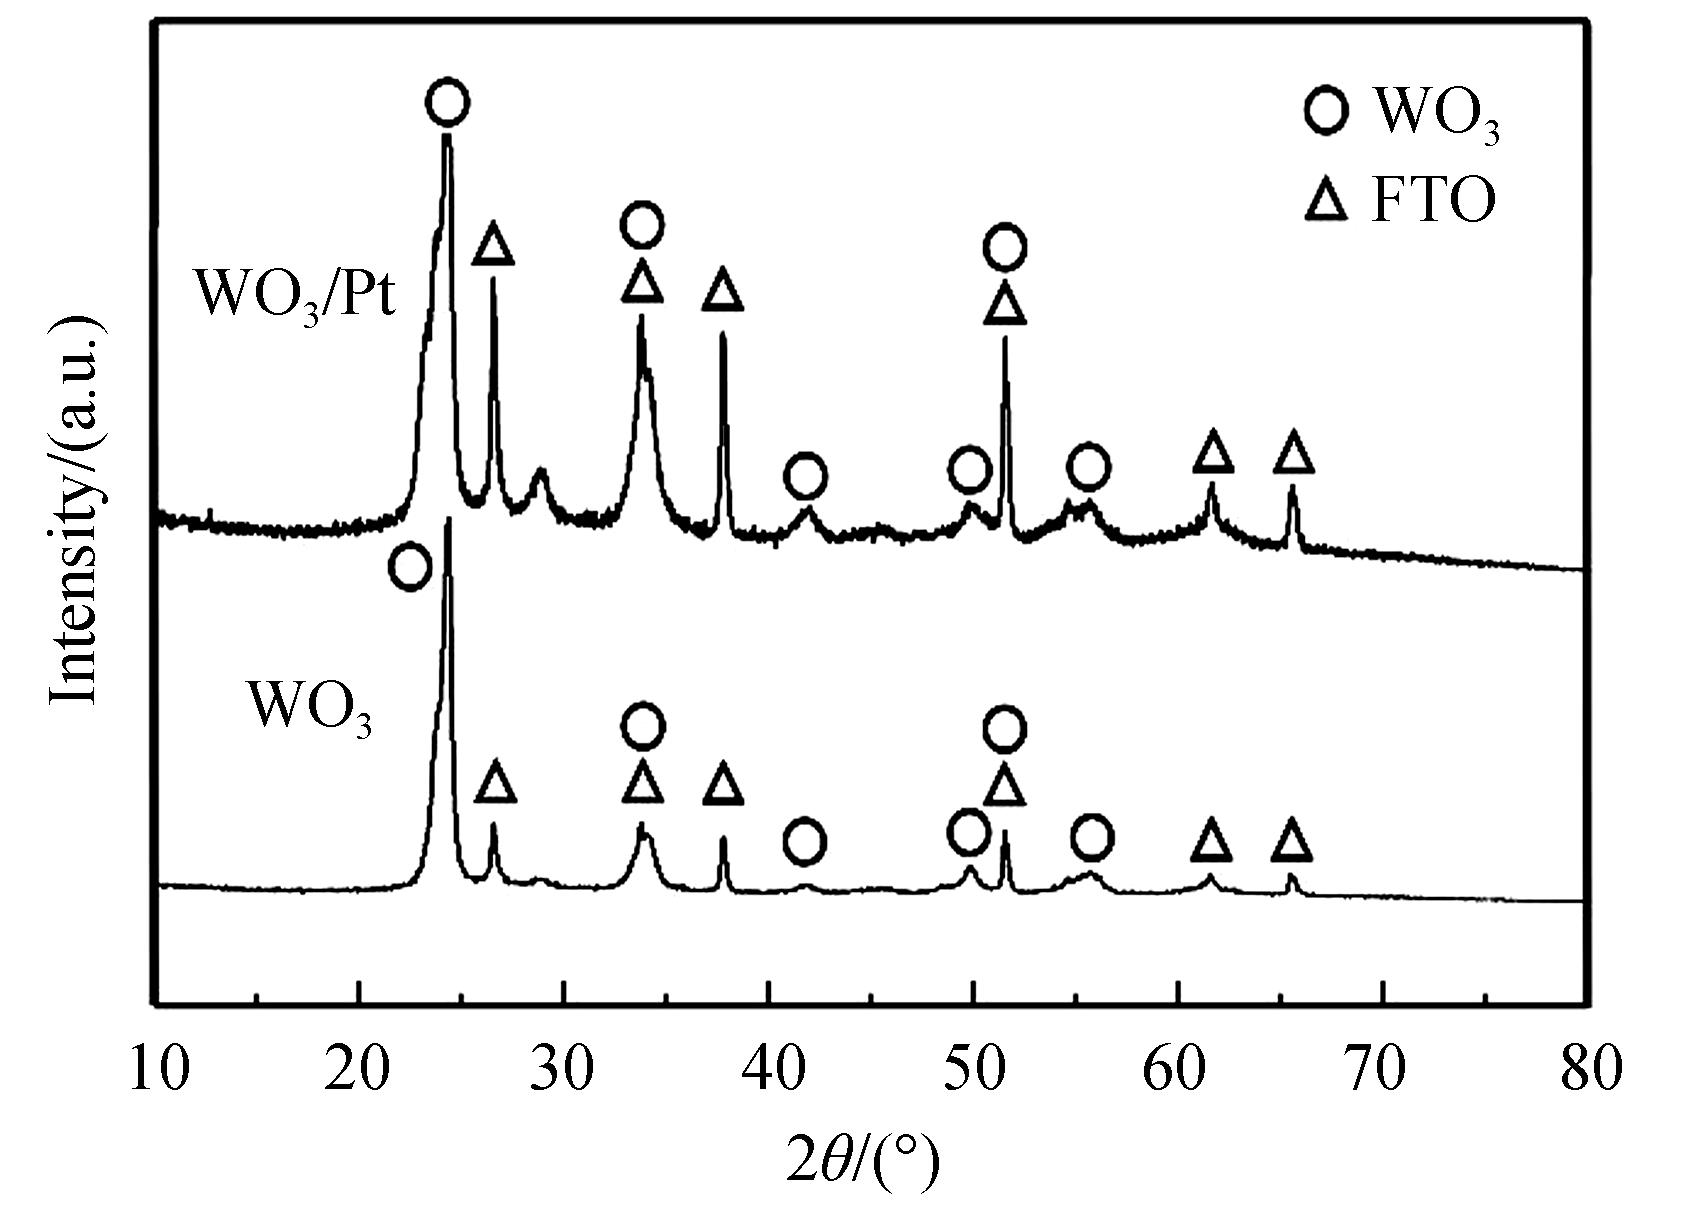 XRD patterns of the WO3 film and WO3/Pt composite thin film